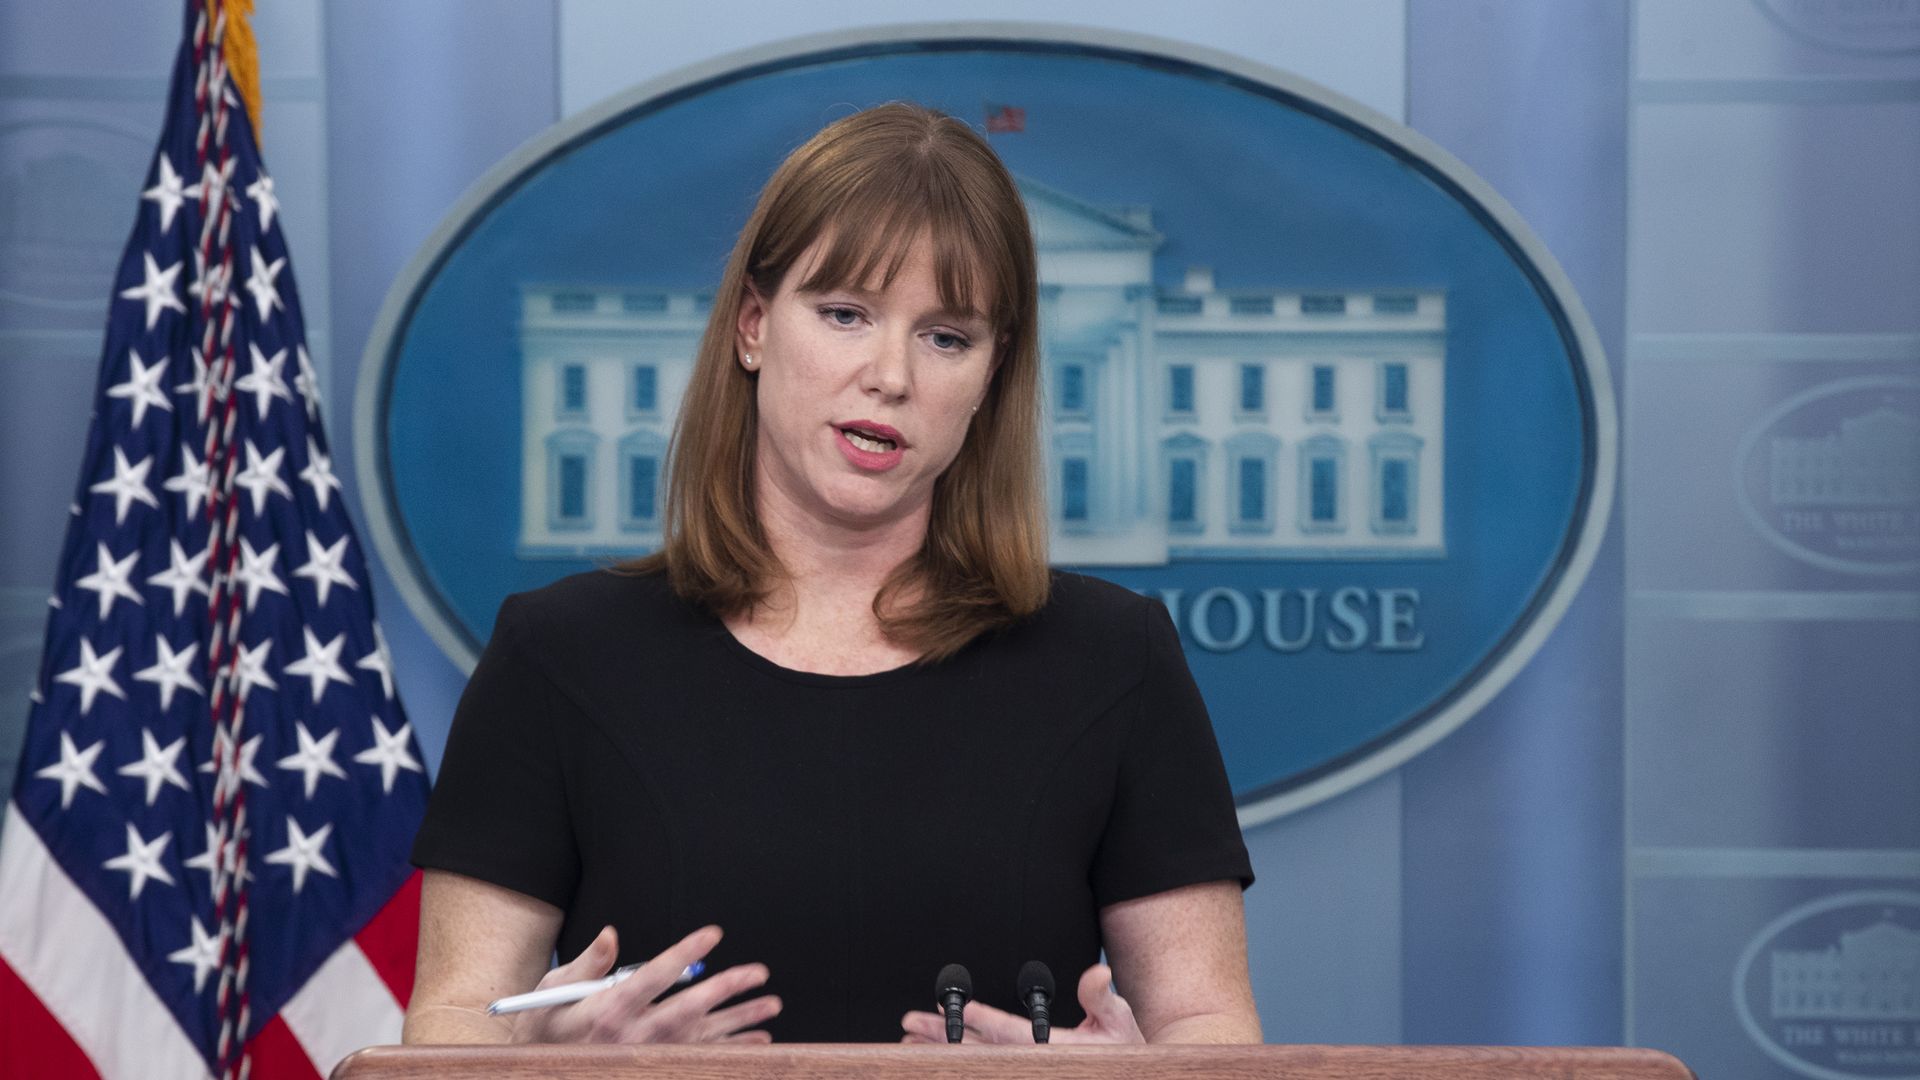 Kate Bedingfield, White House director of communications, speaks during a news conference in the James S. Brady Press Briefing Room at the White House in Washington, D.C.